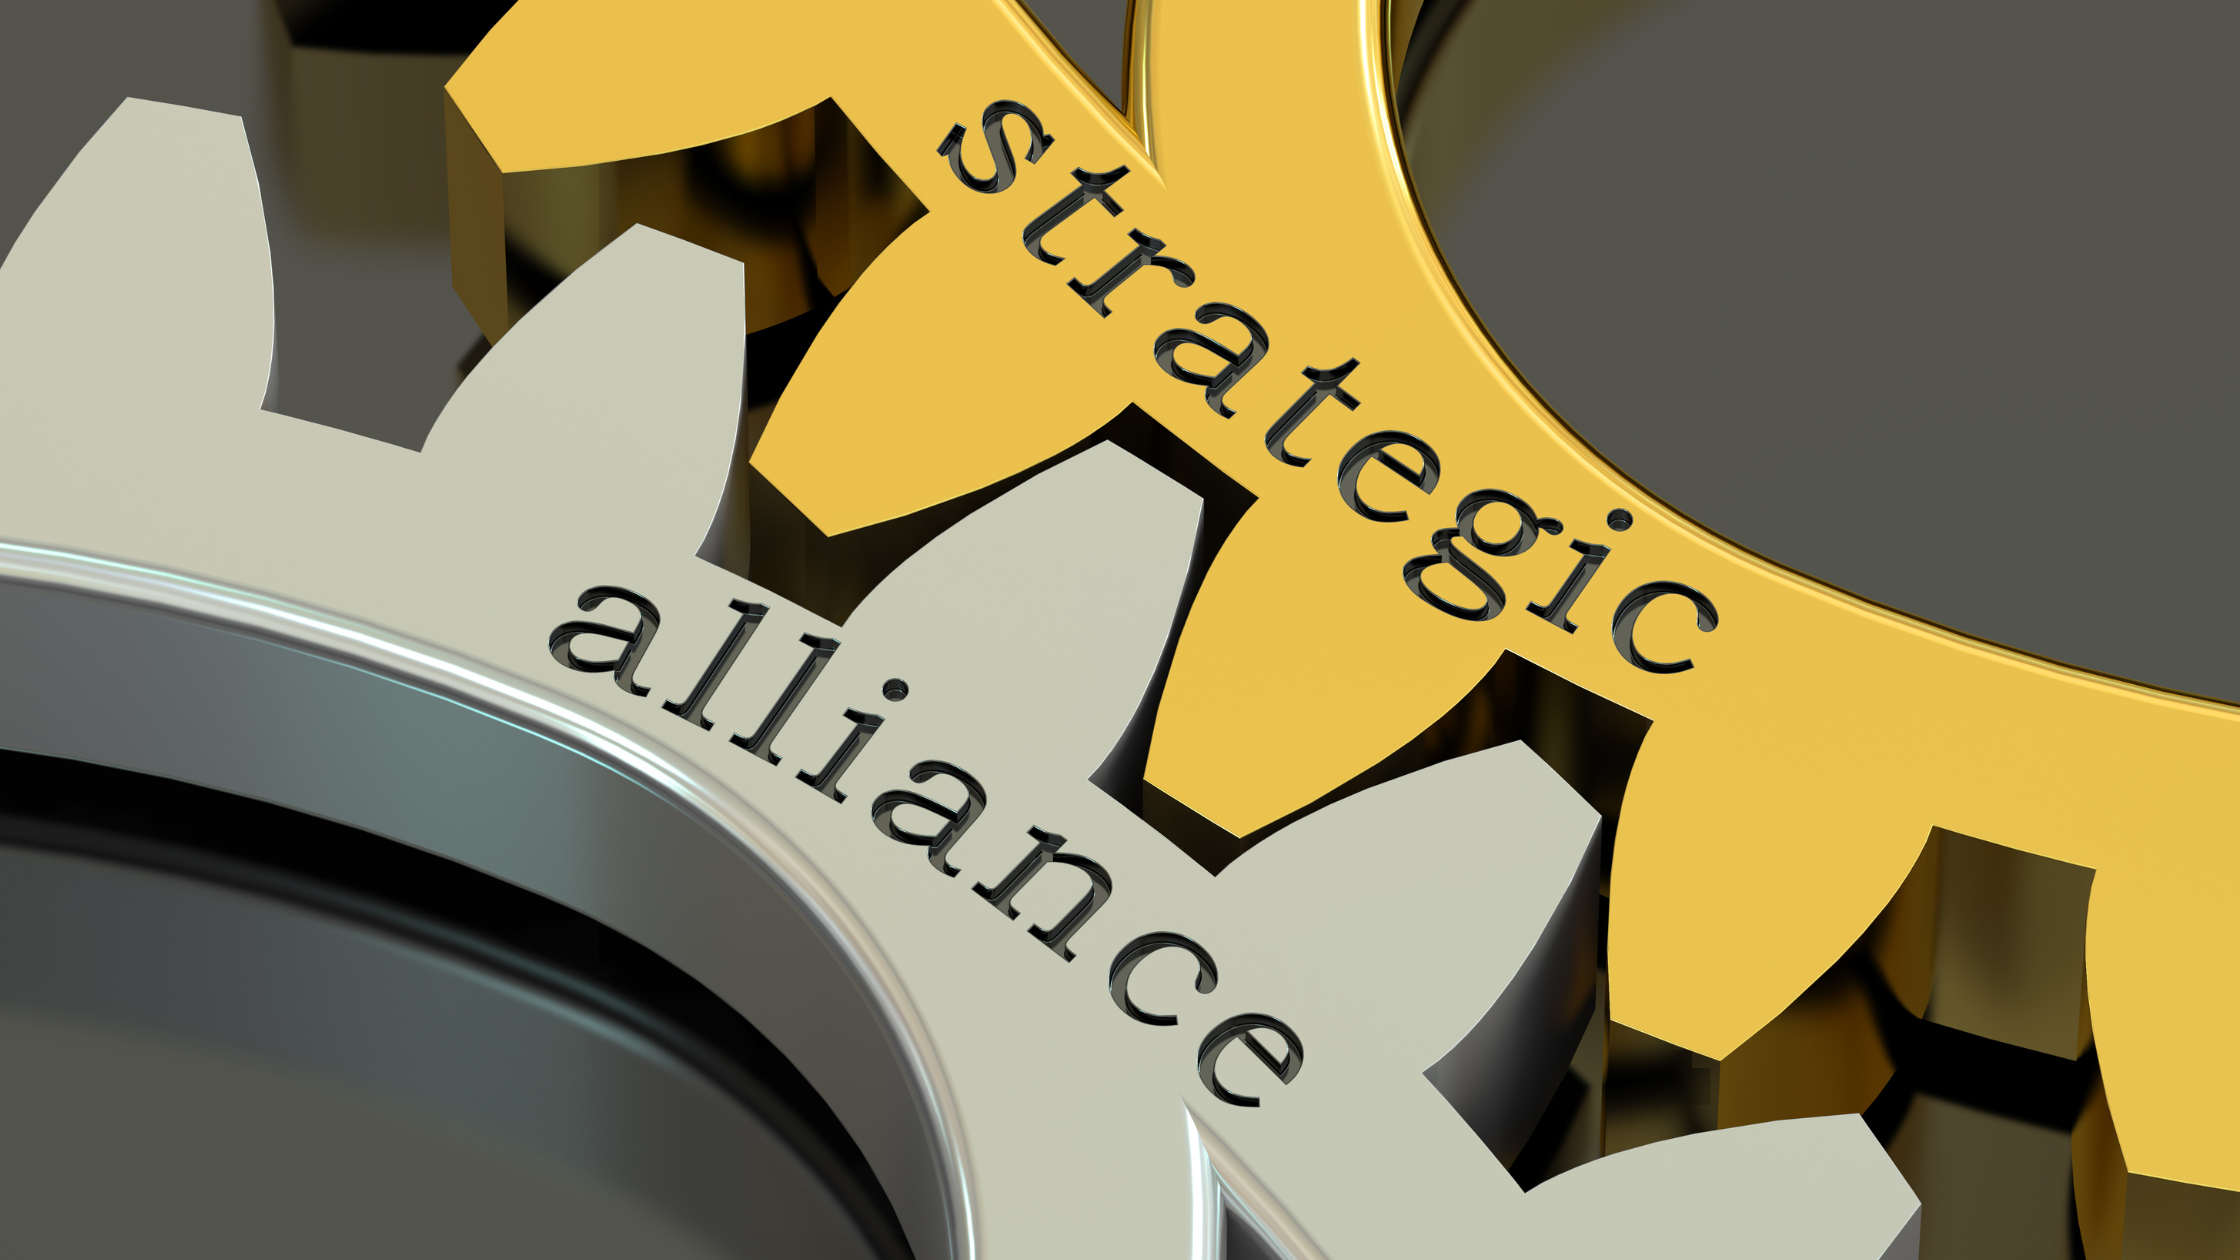 Featured image for “Strategic Alliances and Succession Planning: Ron Draper’s Blueprint for Credit Union Resilience”